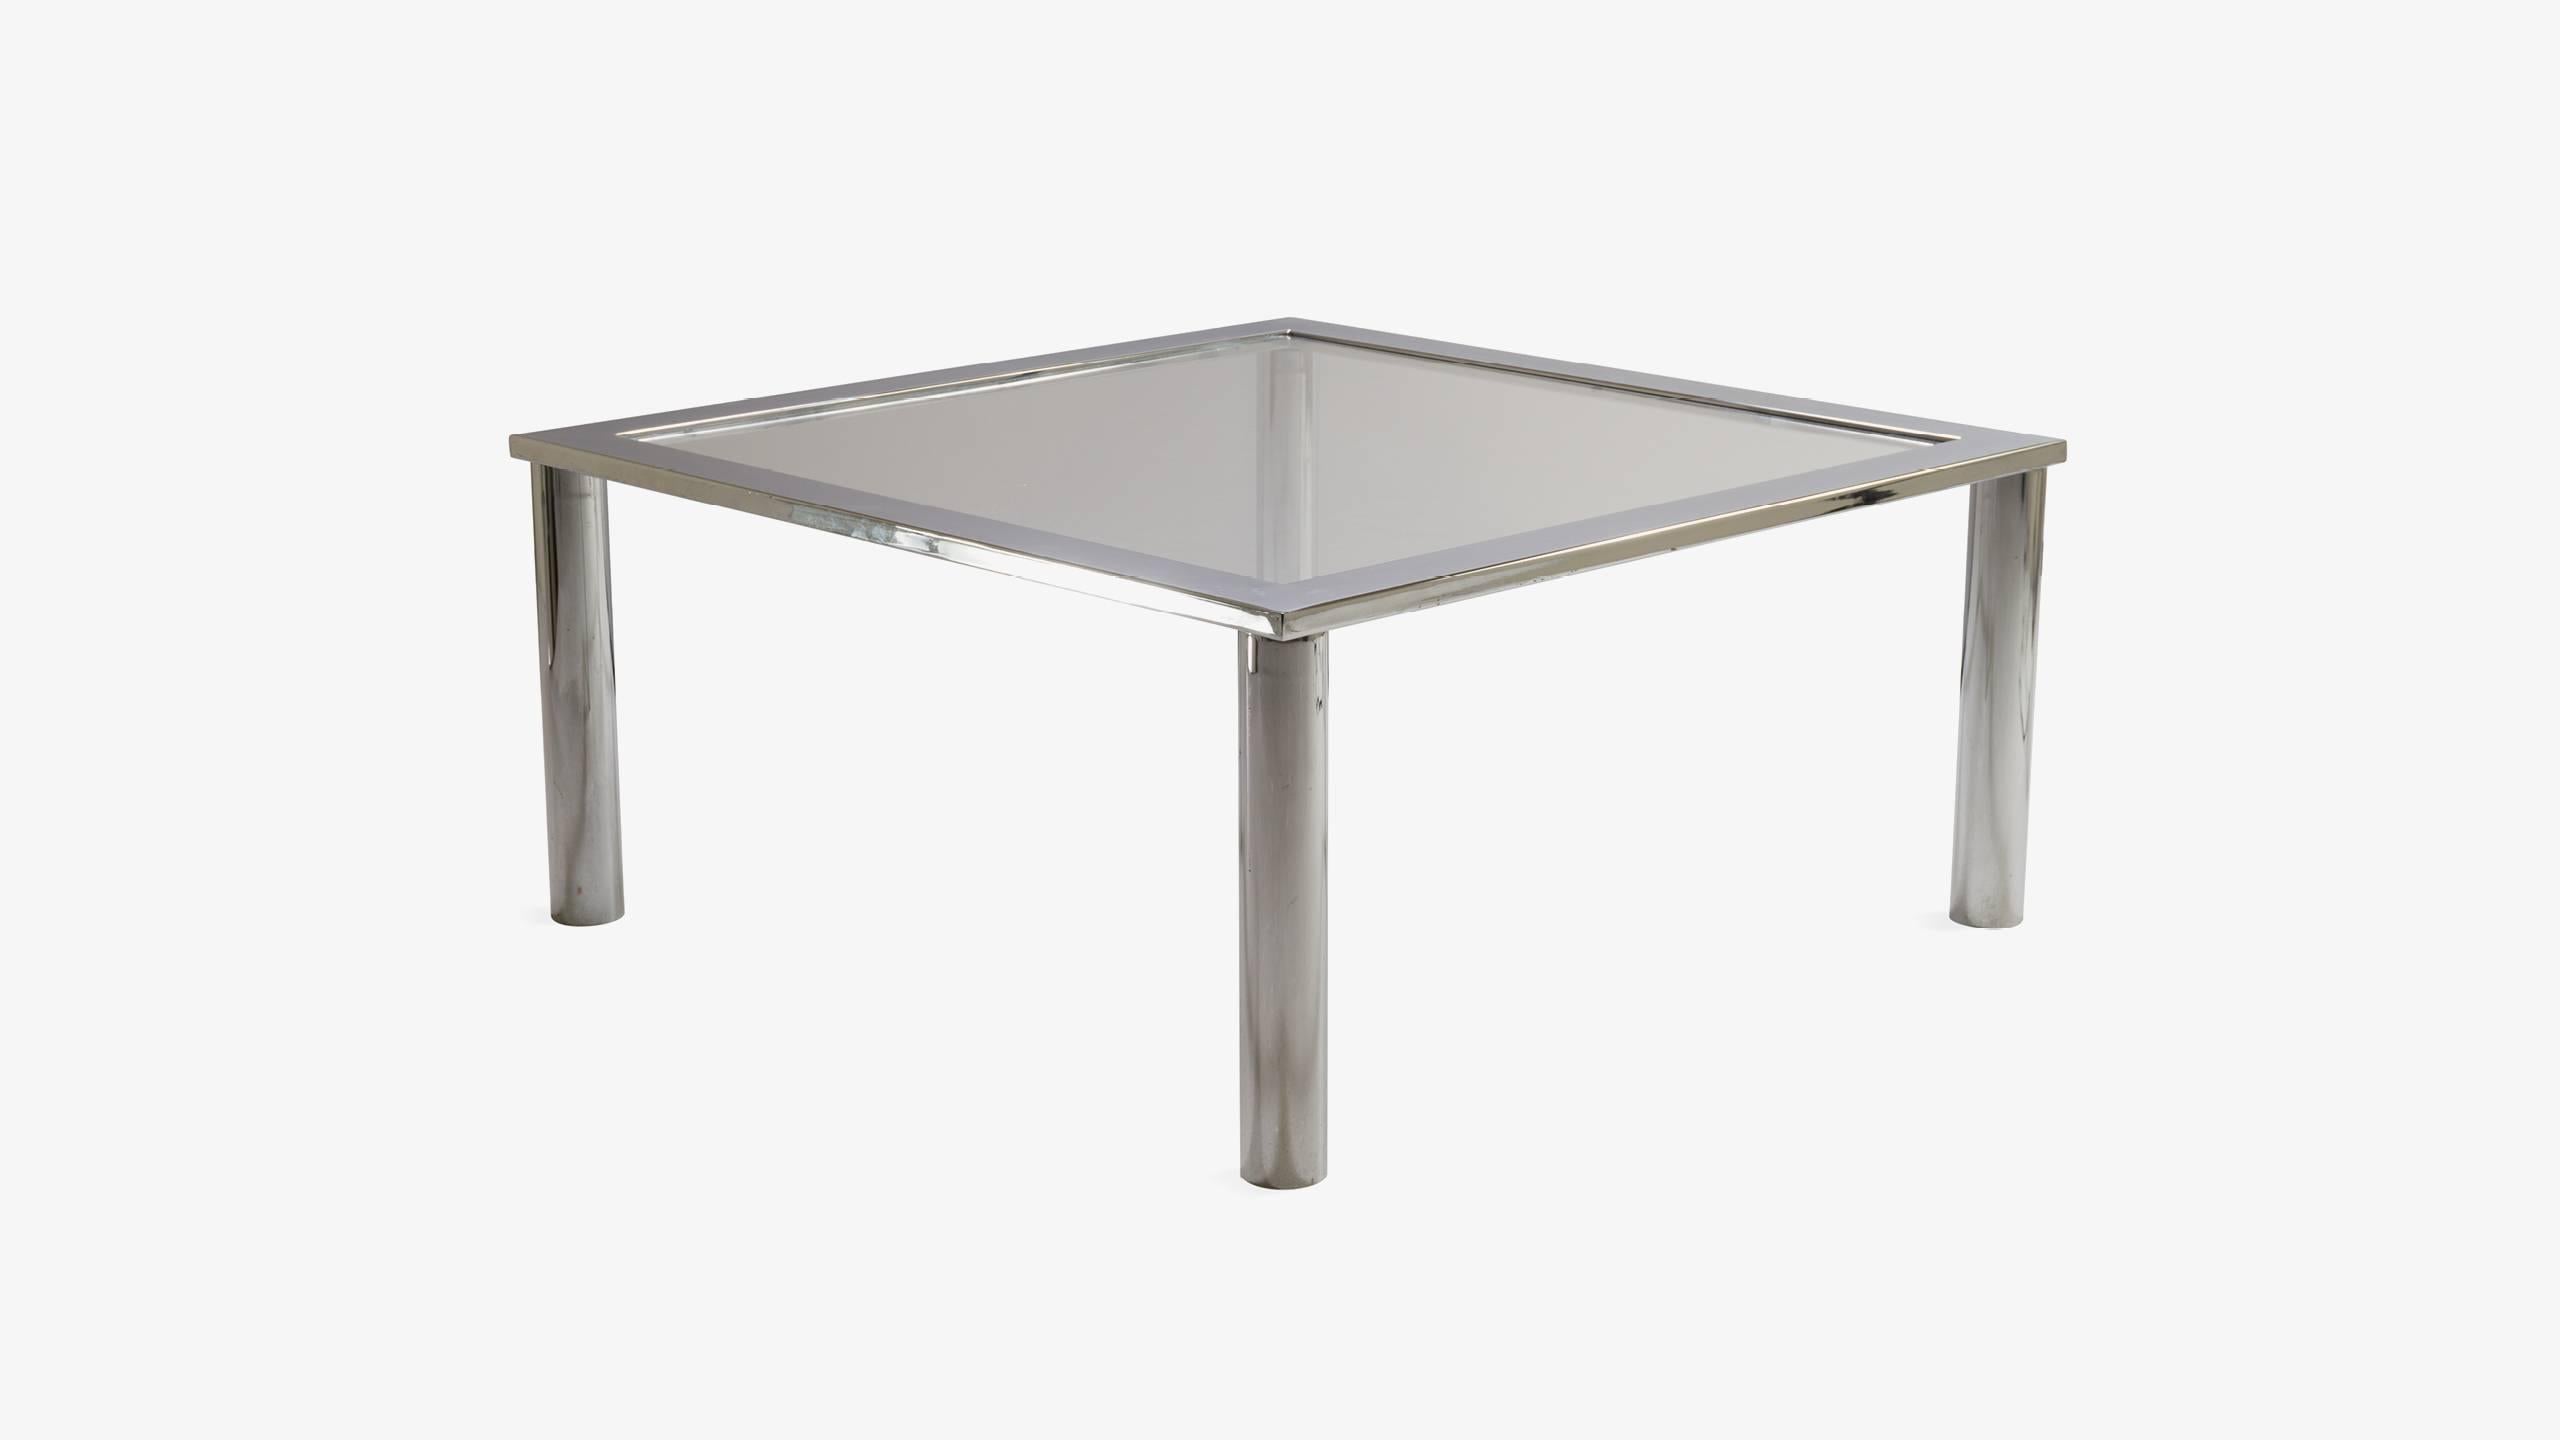 A great addition to any living space. This midcentury cocktail table features a clean lined geometric design, makes quite a statement. A great size for a space to be designed around, very much in the style of Pace. This table features brand new